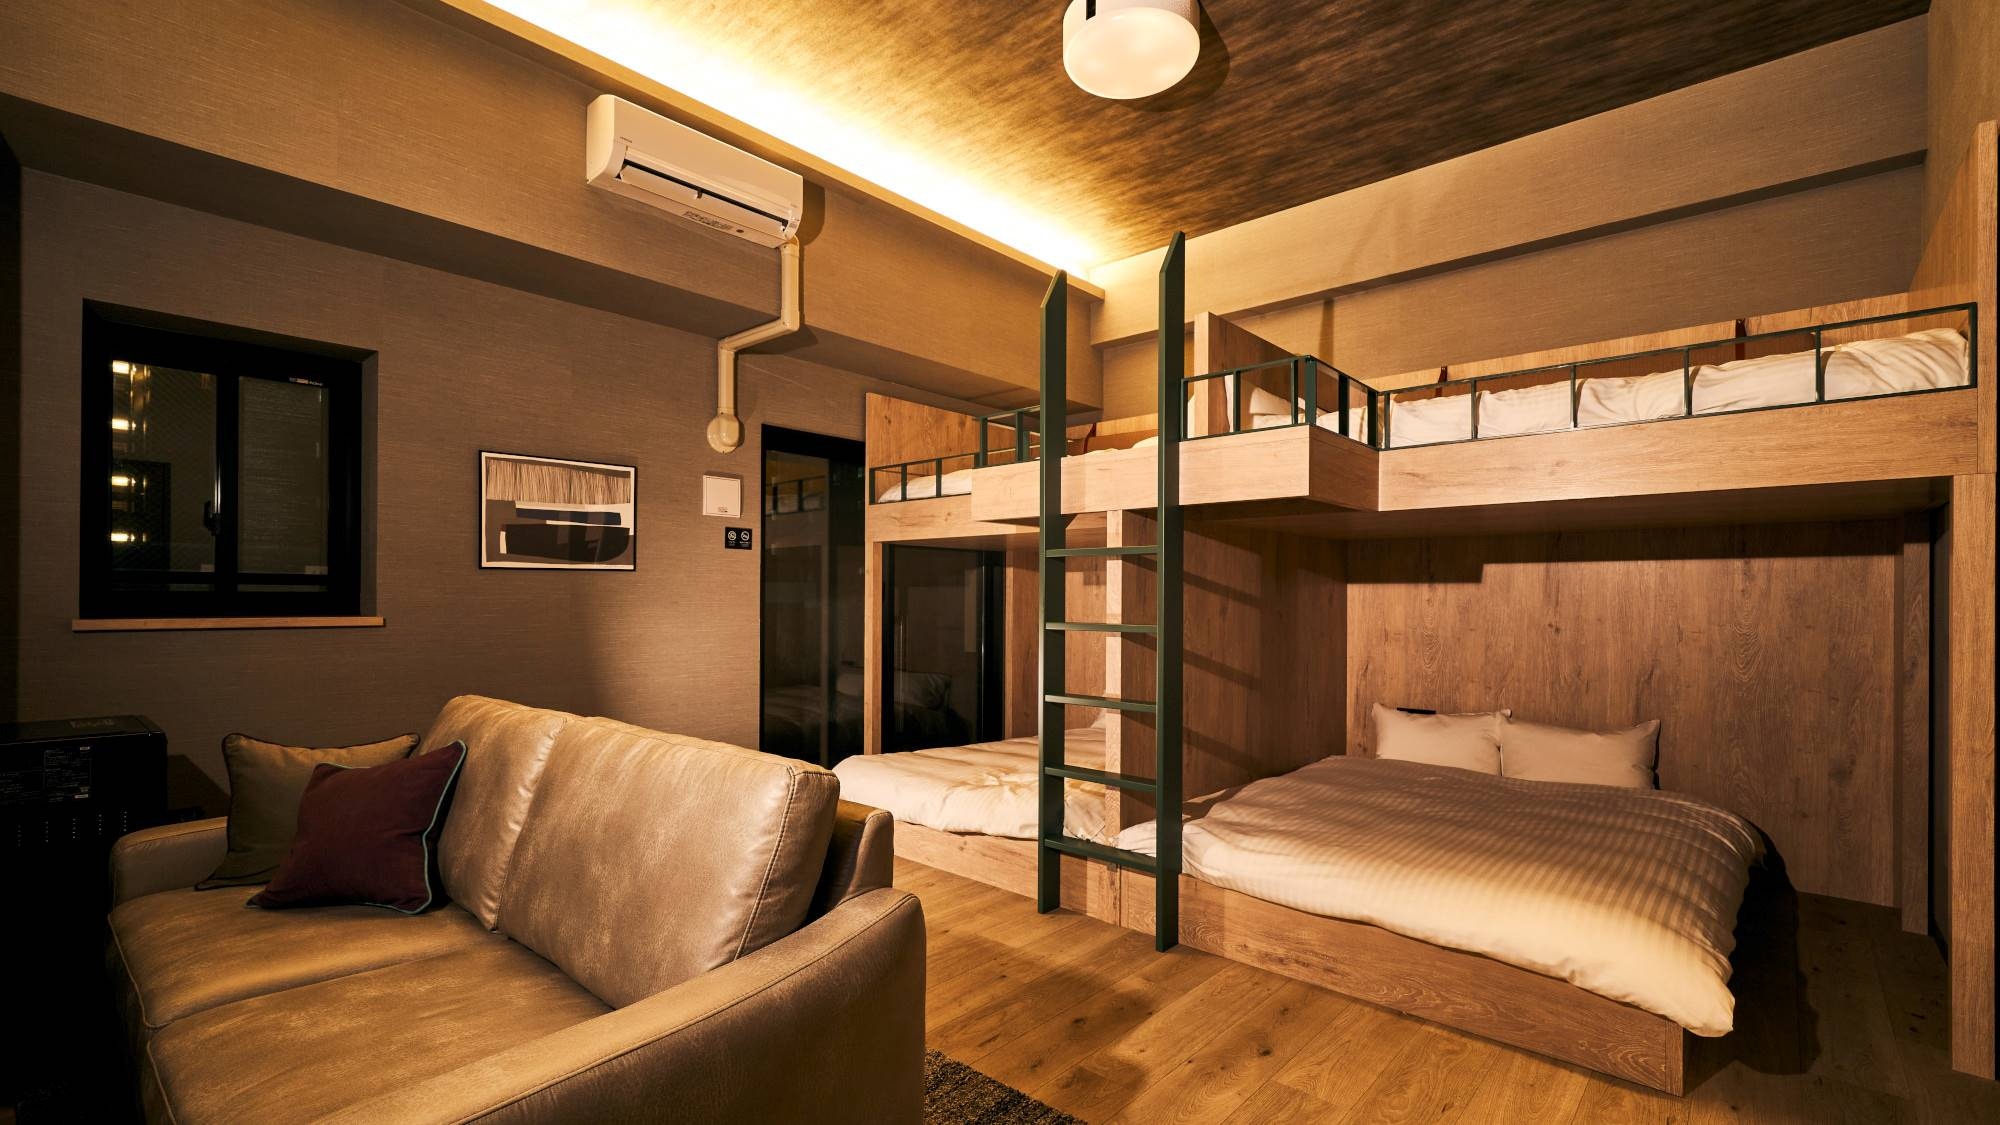 Up to 8 people can stay in Family 8 / Bunk Bed